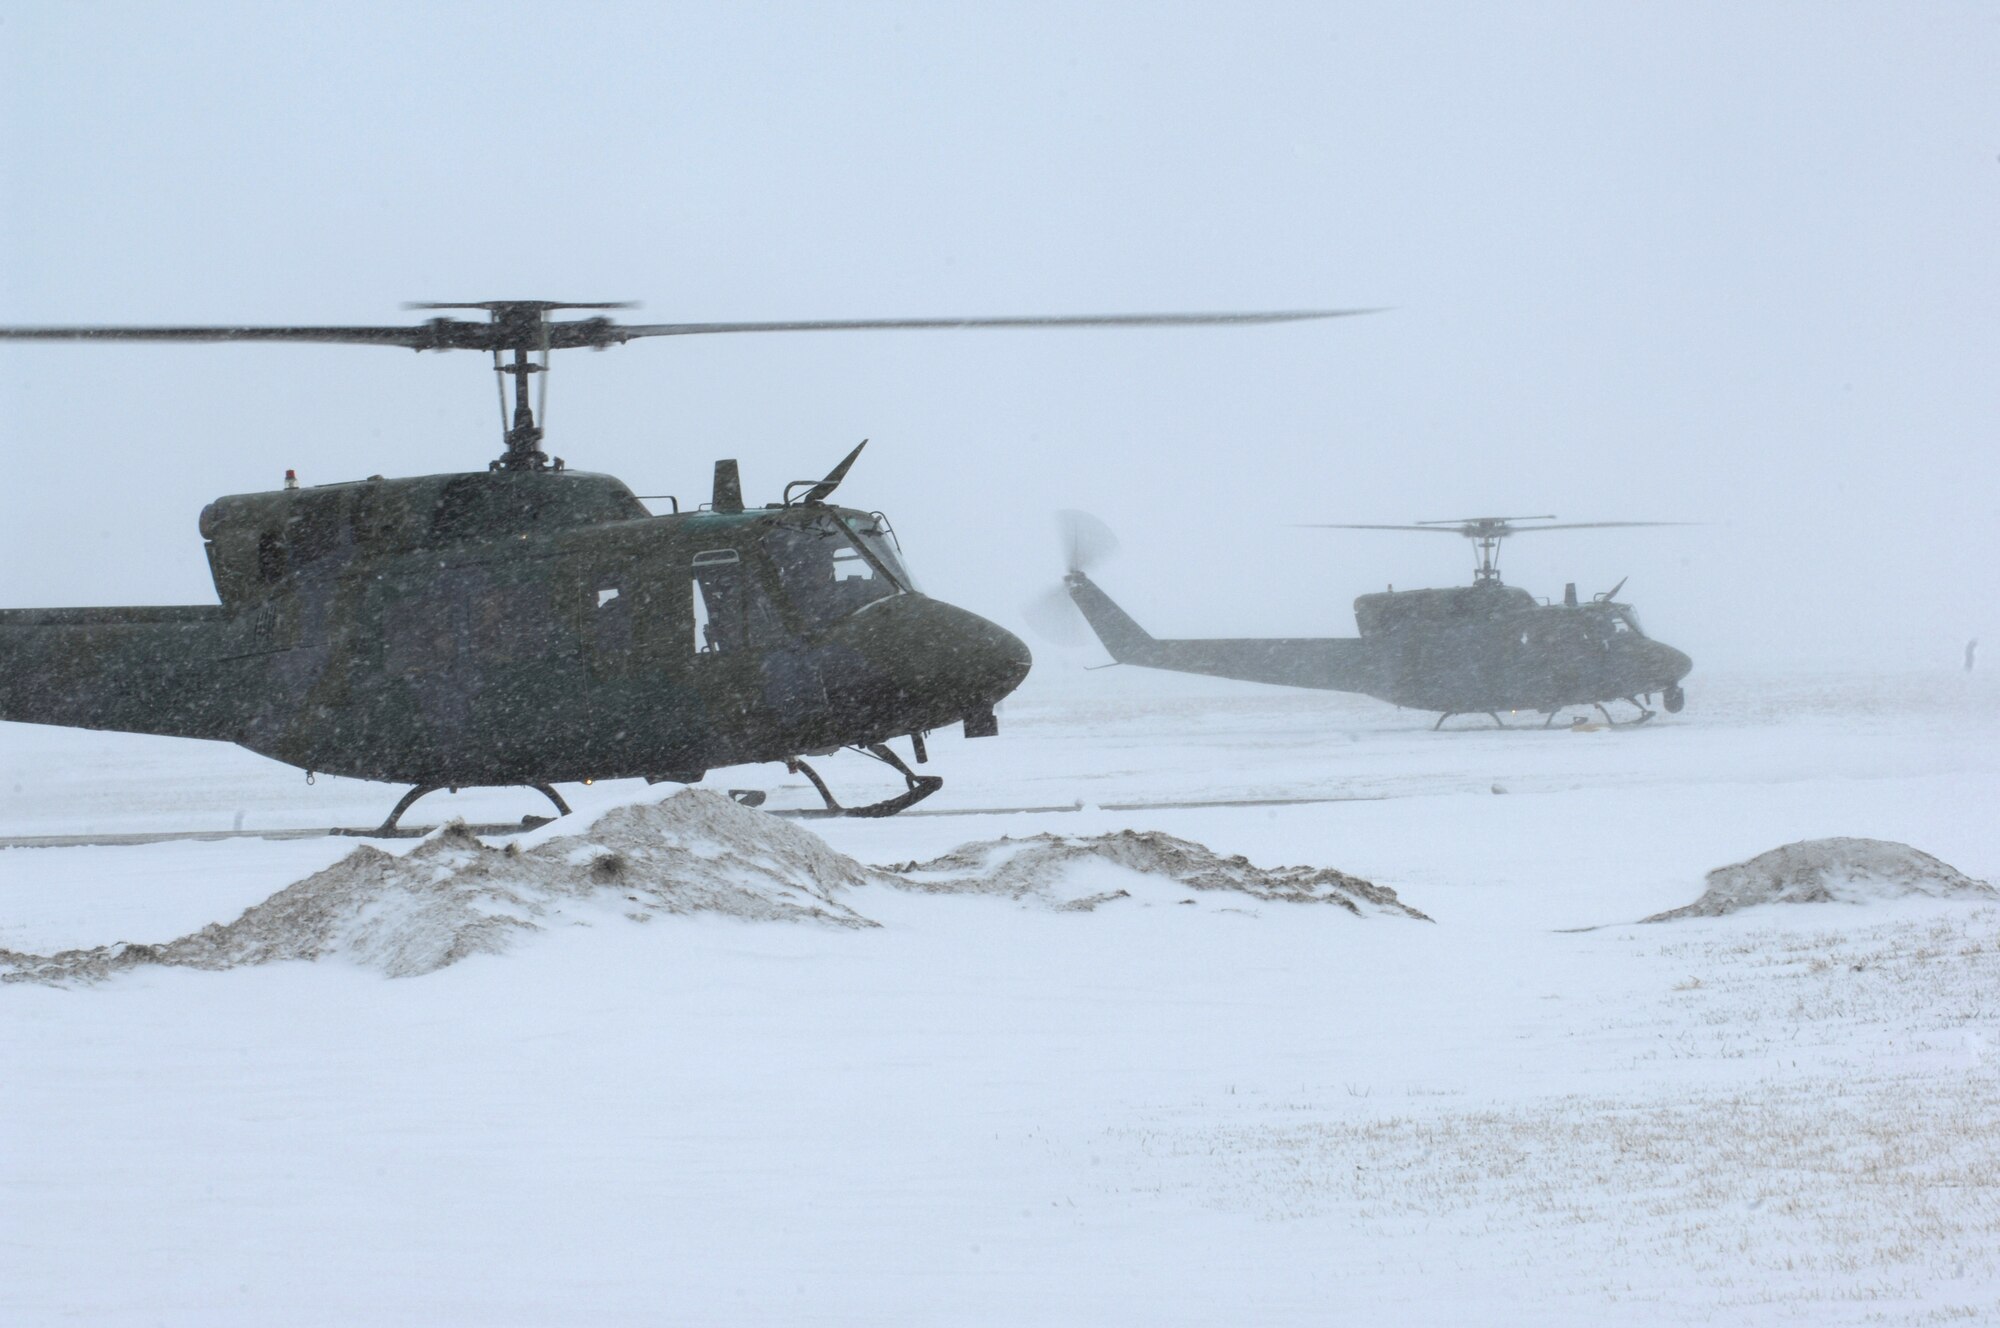 A pair of UH-1N Huey helicopters take off for Bismarck, N.D., March 25 from Minot Air Force Base, N.D., to assist in flood relief efforts.  Eight crewmembers and the two helicopters from the 54th Helicopter Squadron deployed to aid the relief efforts. (U.S. Air Force photo/Senior Airman Joe Rivera) 
